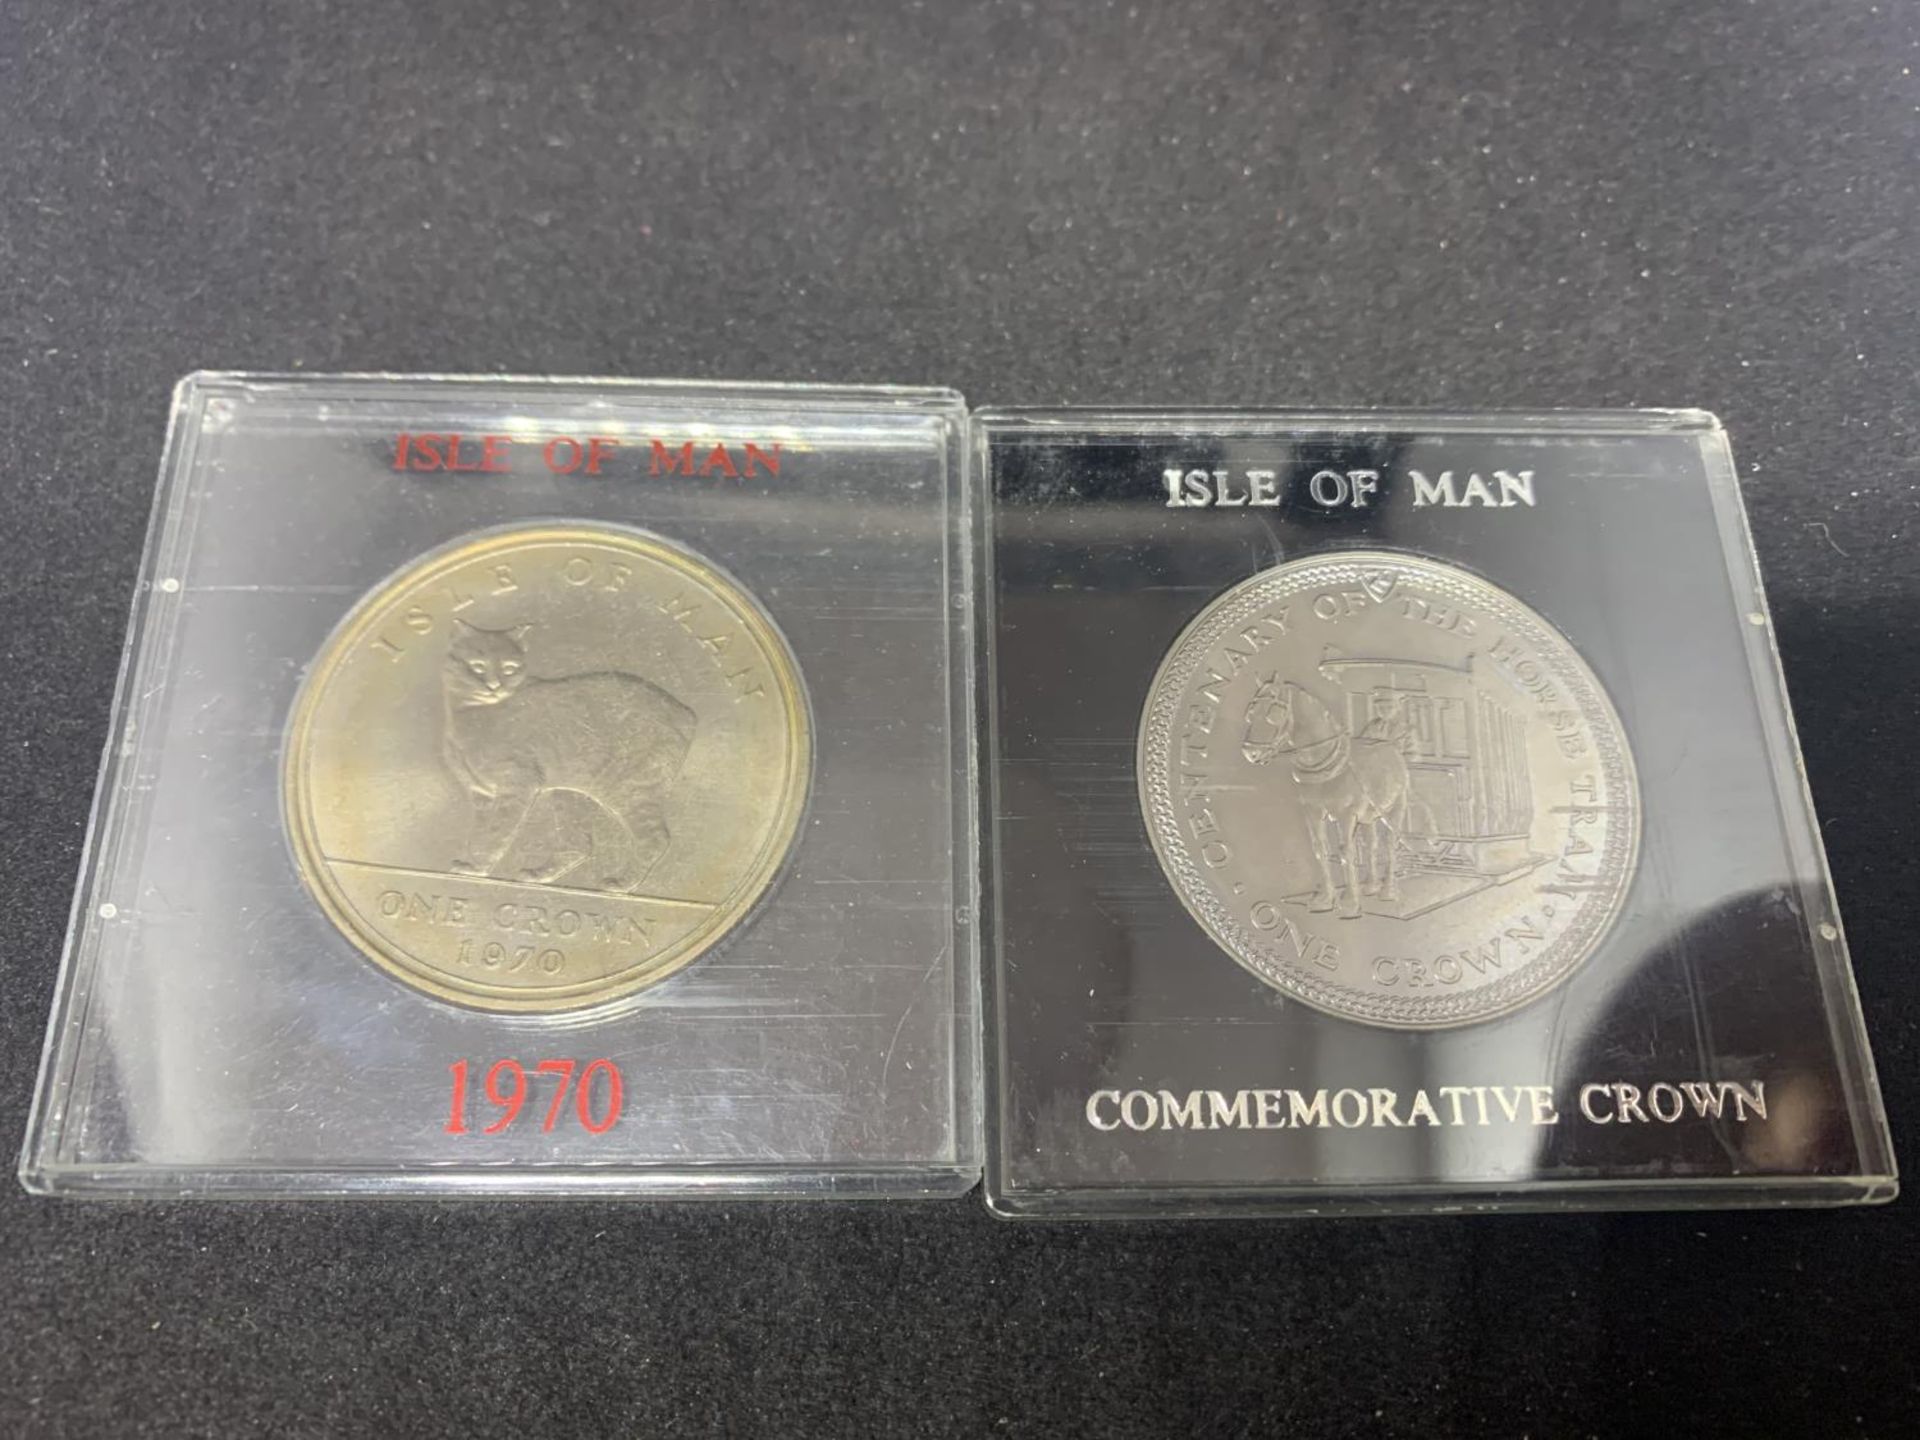 TWO ISLE OF MAN CROWNS